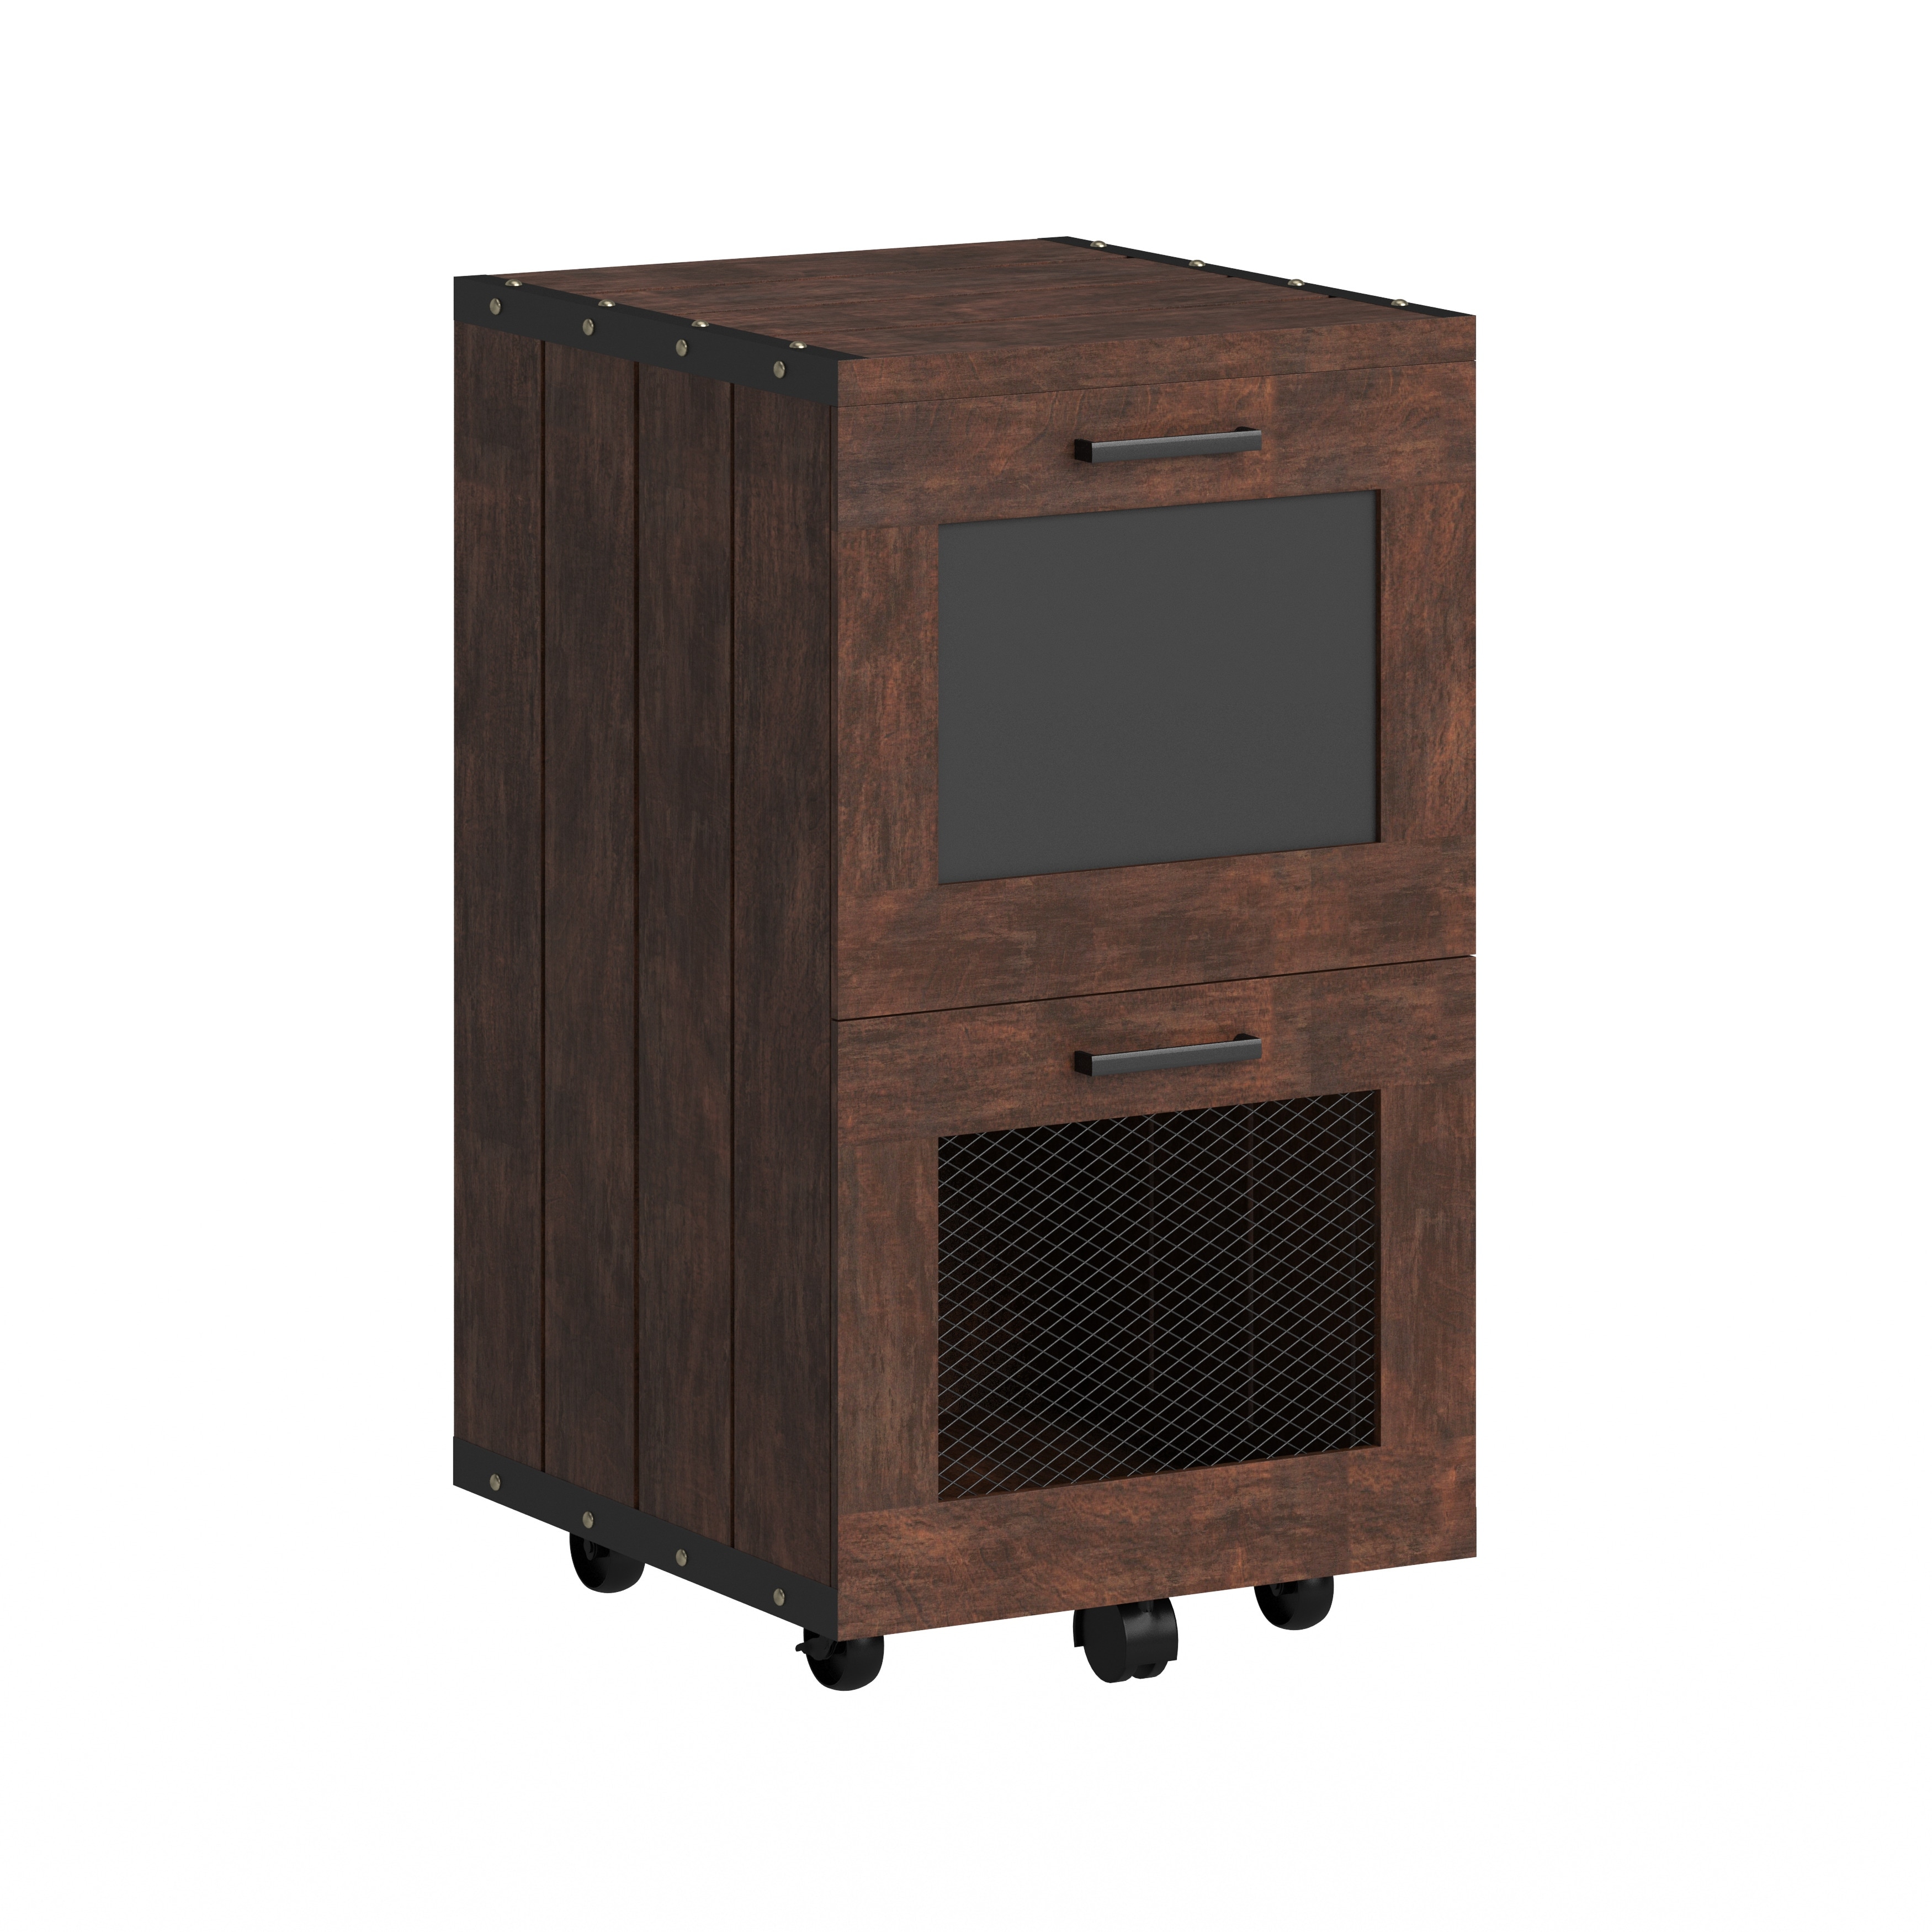 Furniture Of America Days Rustic Walnut 2 Drawer File Cabinet Overstock 14163436